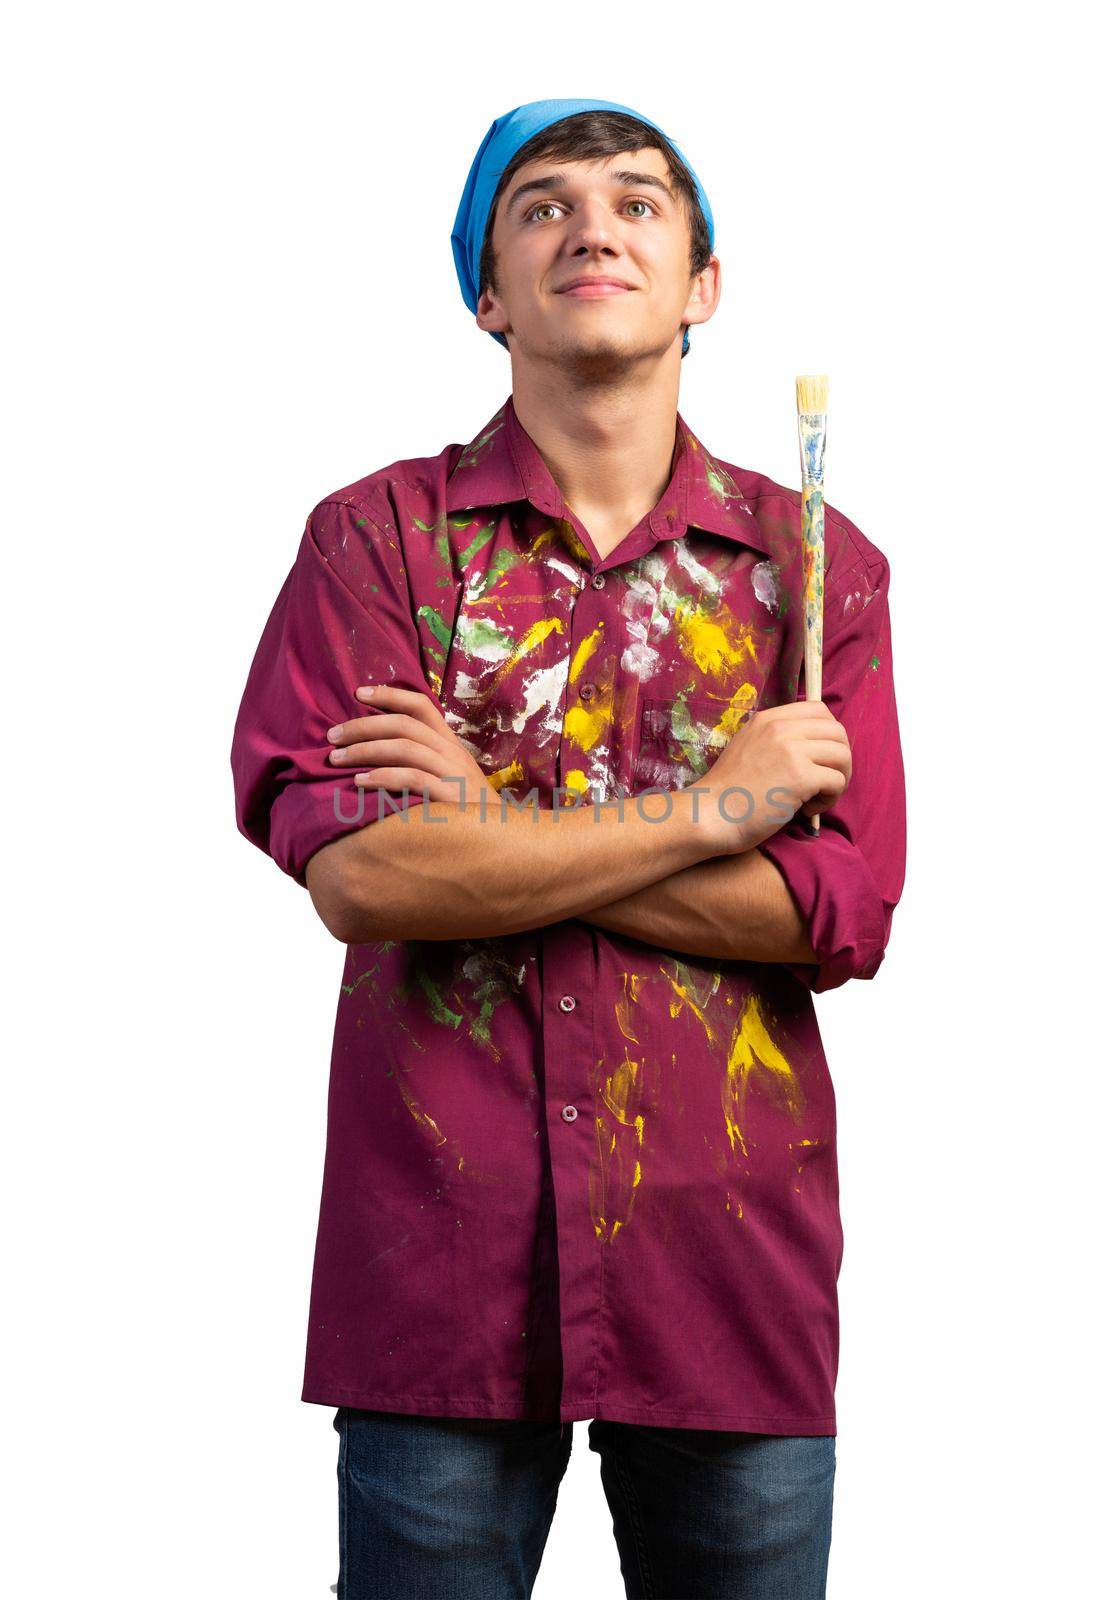 Smiling young painter artist holding paintbrush. Portrait of happy decorator looking upwards isolated on white background. Artistic occupation and creative profession. Art school student posing.